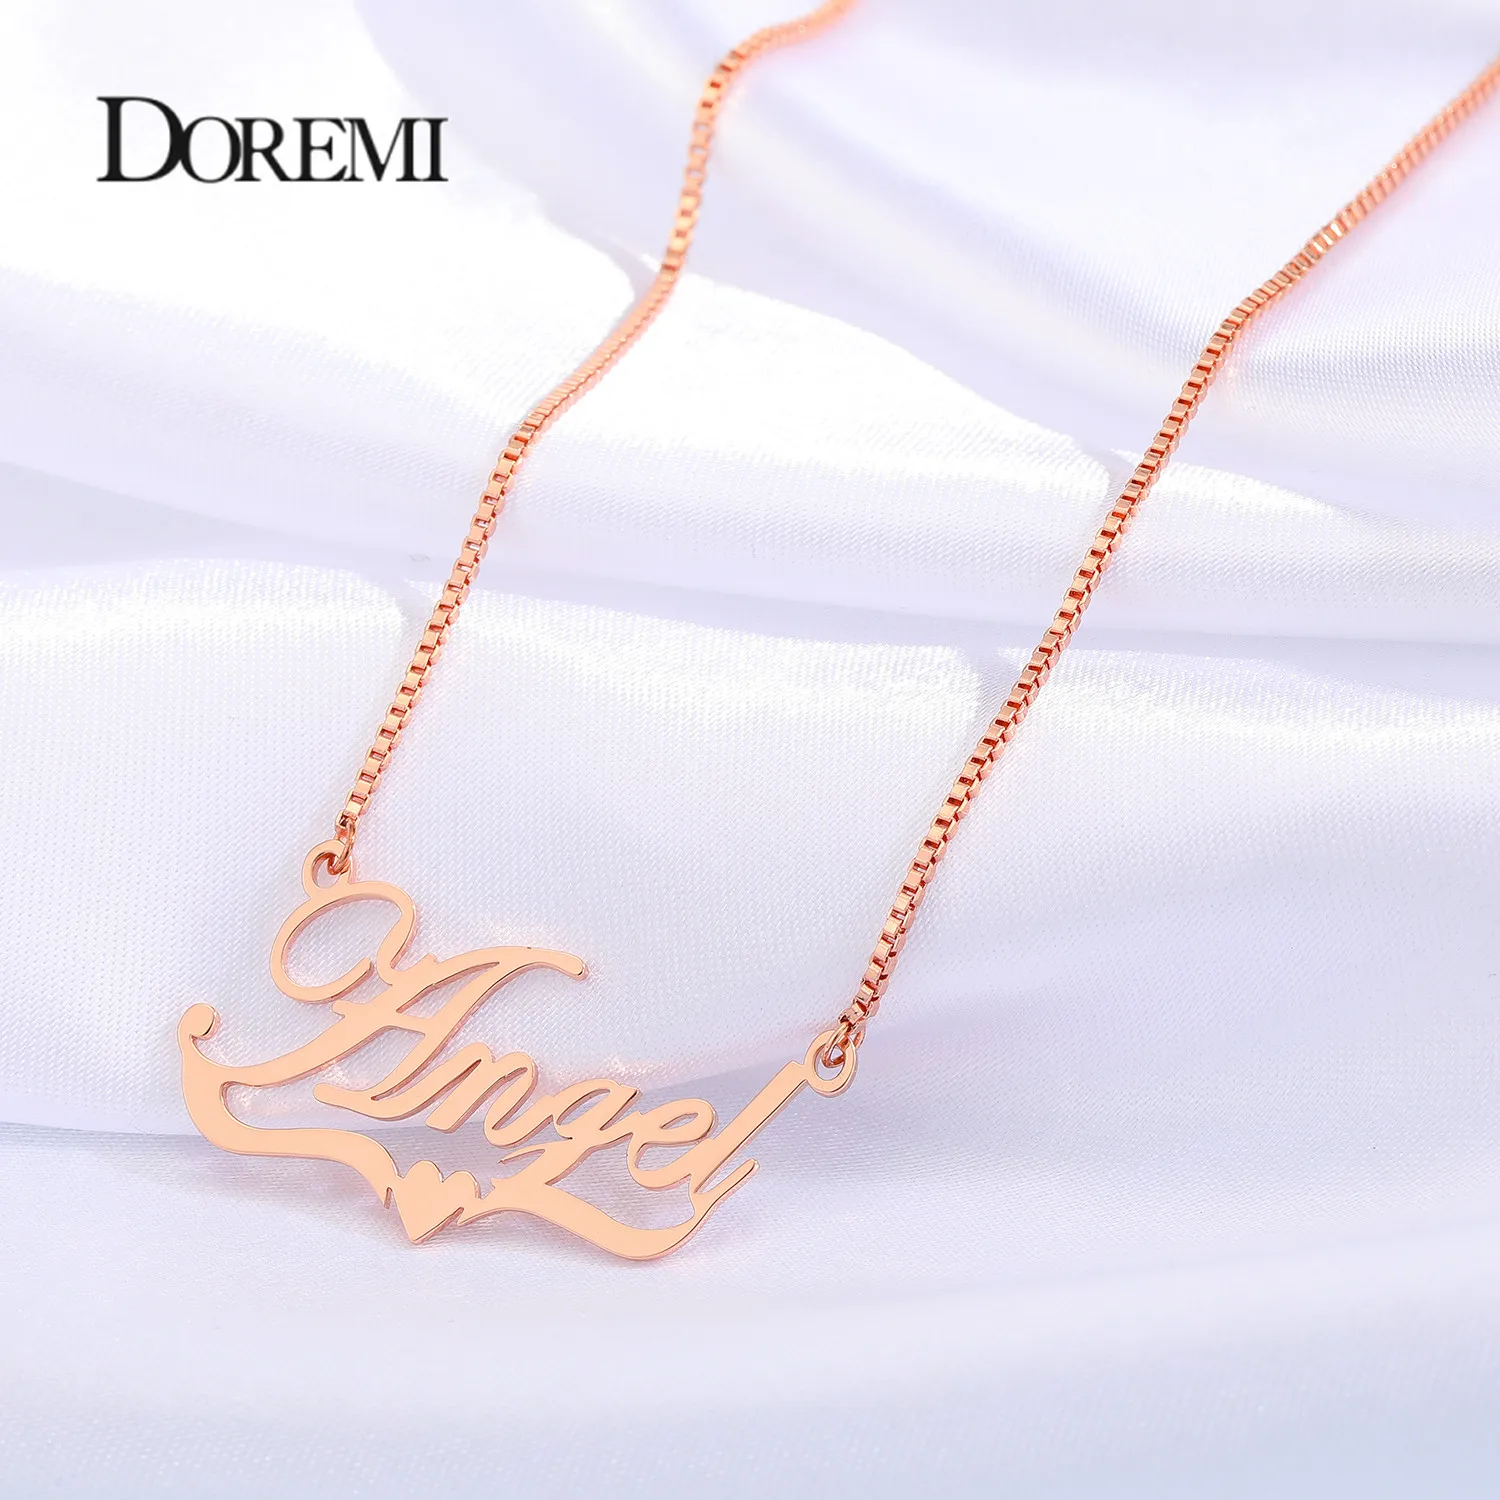 DOREMI Stainless Steel  Custom Name Necklace Personalized Name Pendant Heart Choker for Women Men Jewelry Valentine's Day Gift valentine s mothers day custom photo projection necklace heart shaped projection picture necklace anniversary gifts jewelry